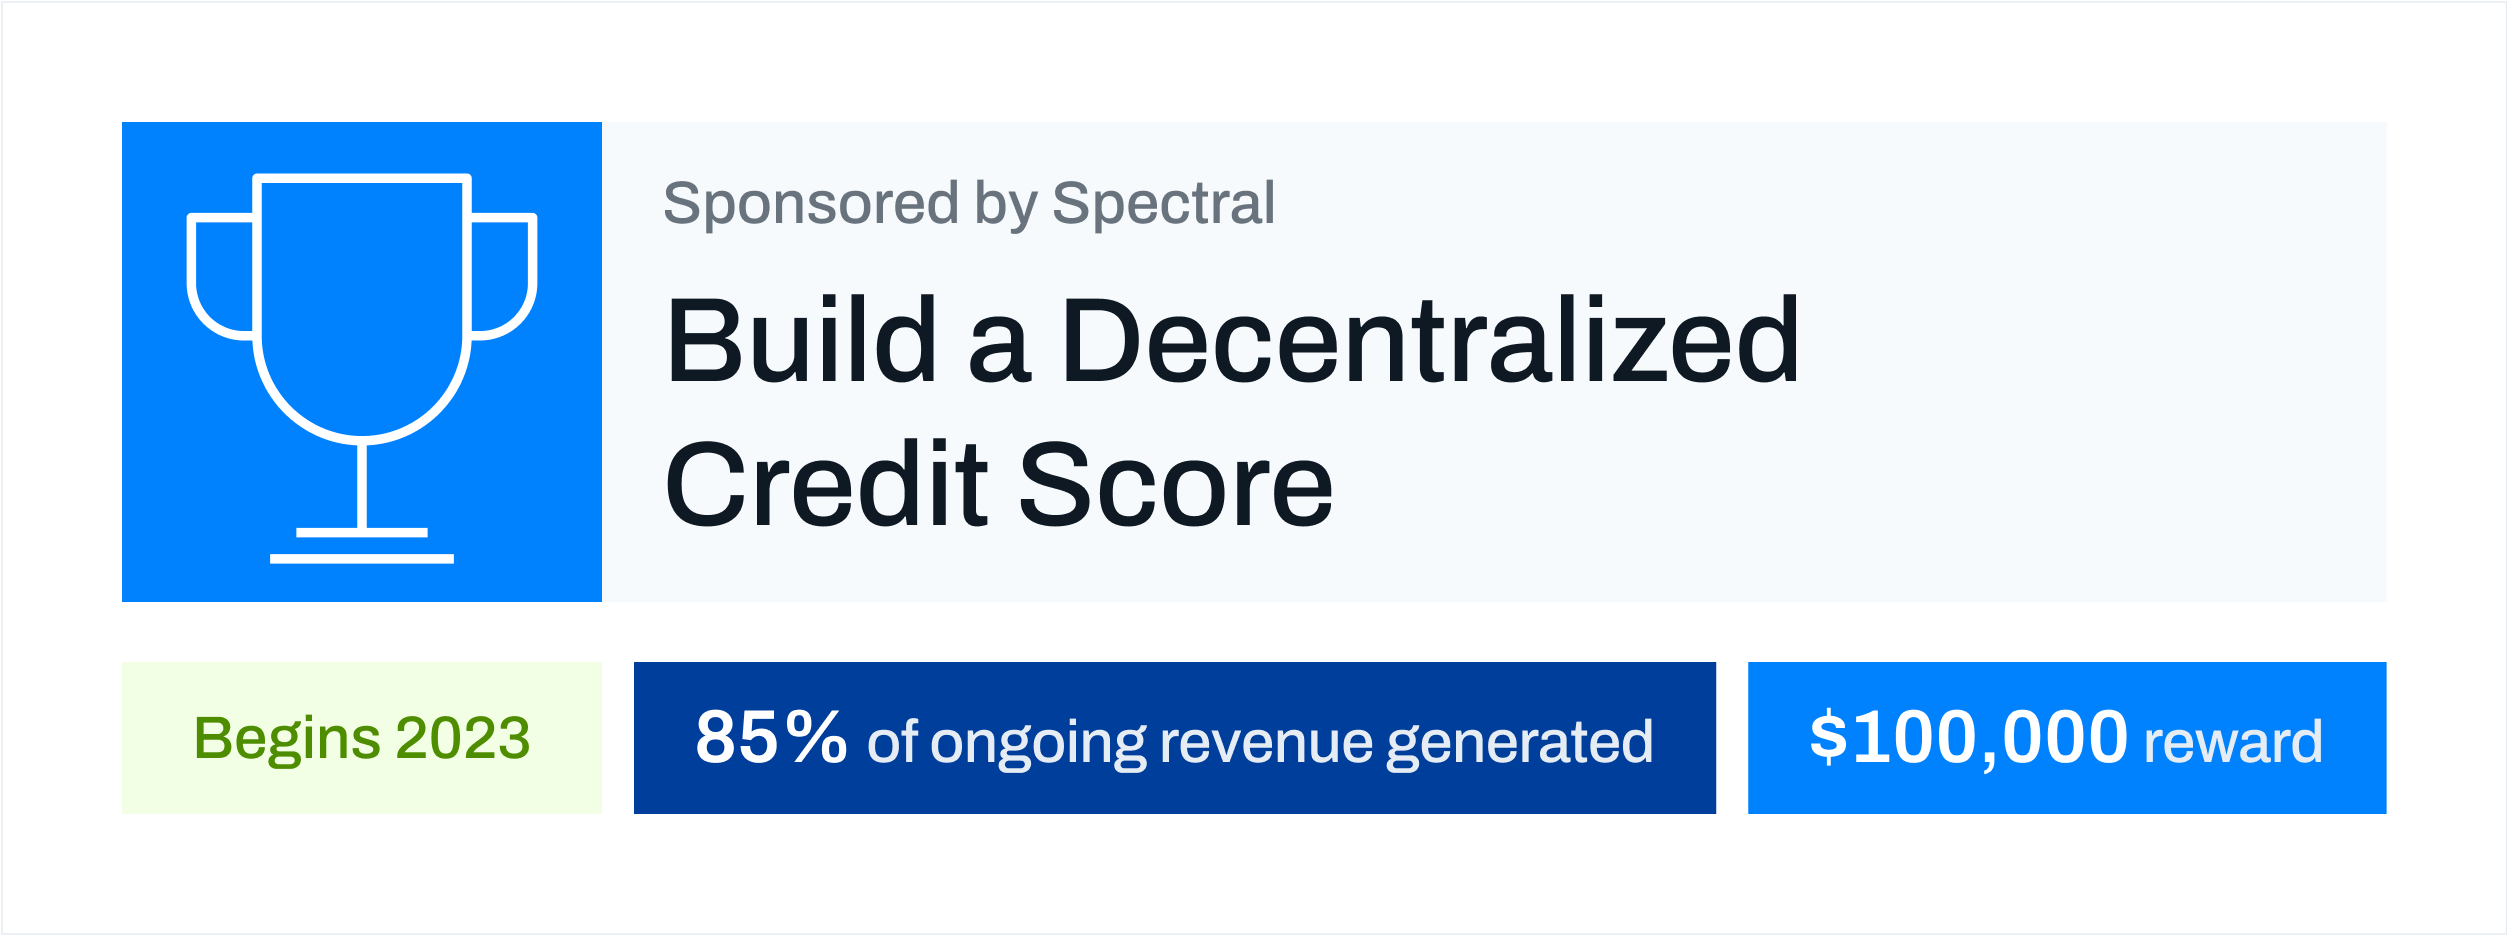 Introducing Challenge #1: Decentralized Credit Scoring in Web3